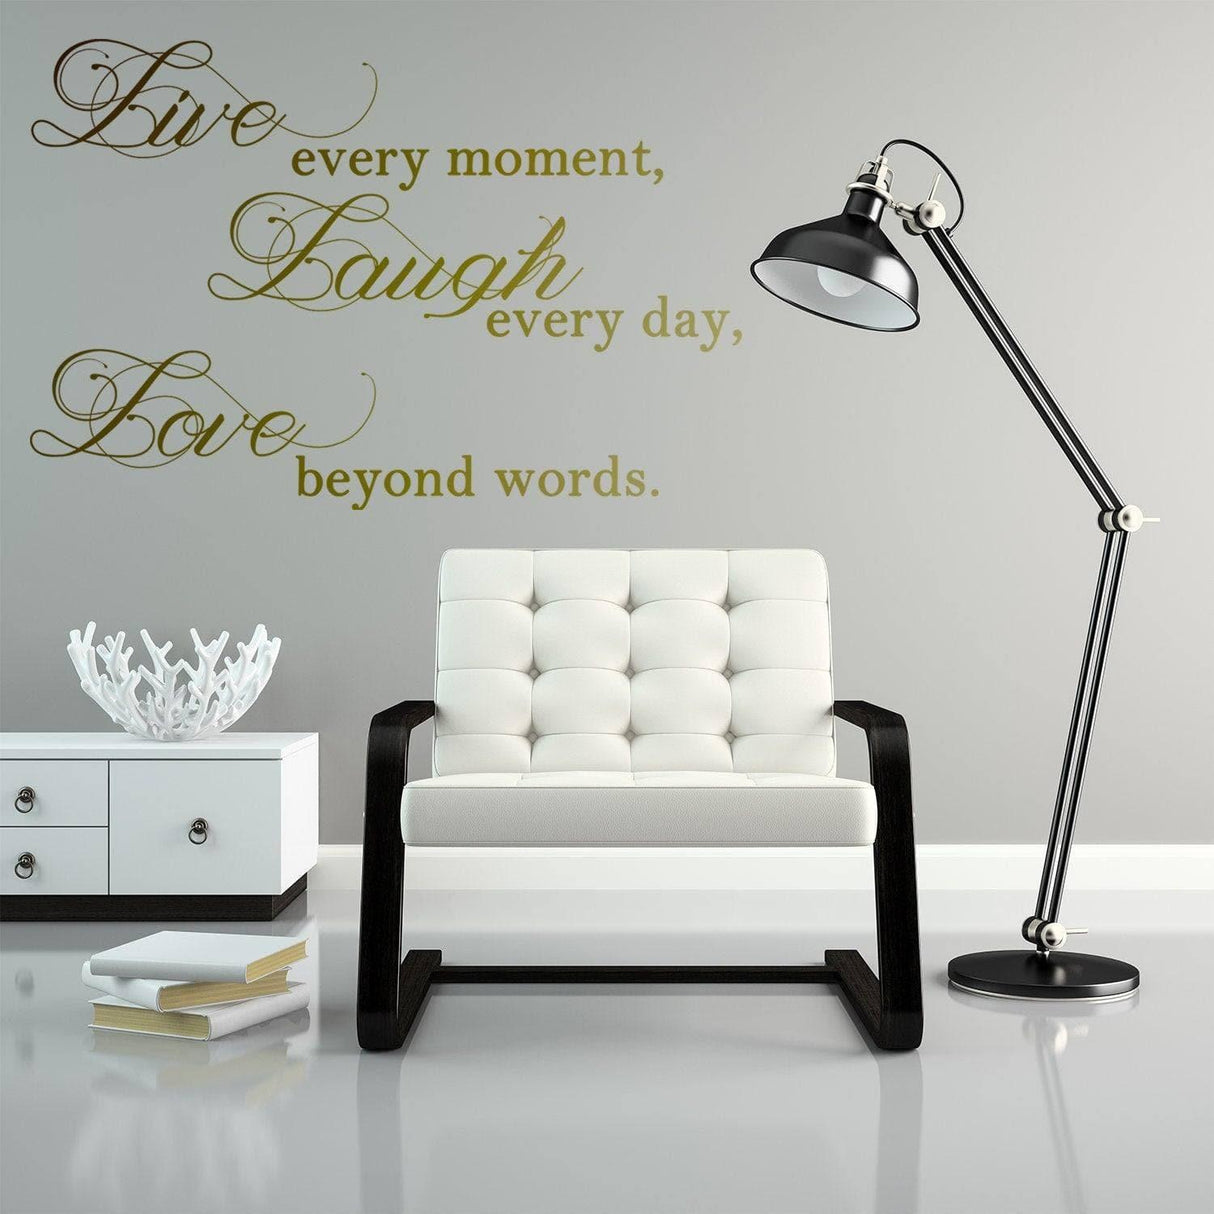 https://decords.com/cdn/shop/files/live-laugh-love-sticker-quote-art-mac-wall-stickers-quotes-window-words-life-vinyl-decal-laptop-positive-inspiration-family-bedroom-decords-10.jpg?v=1690992289&width=1214